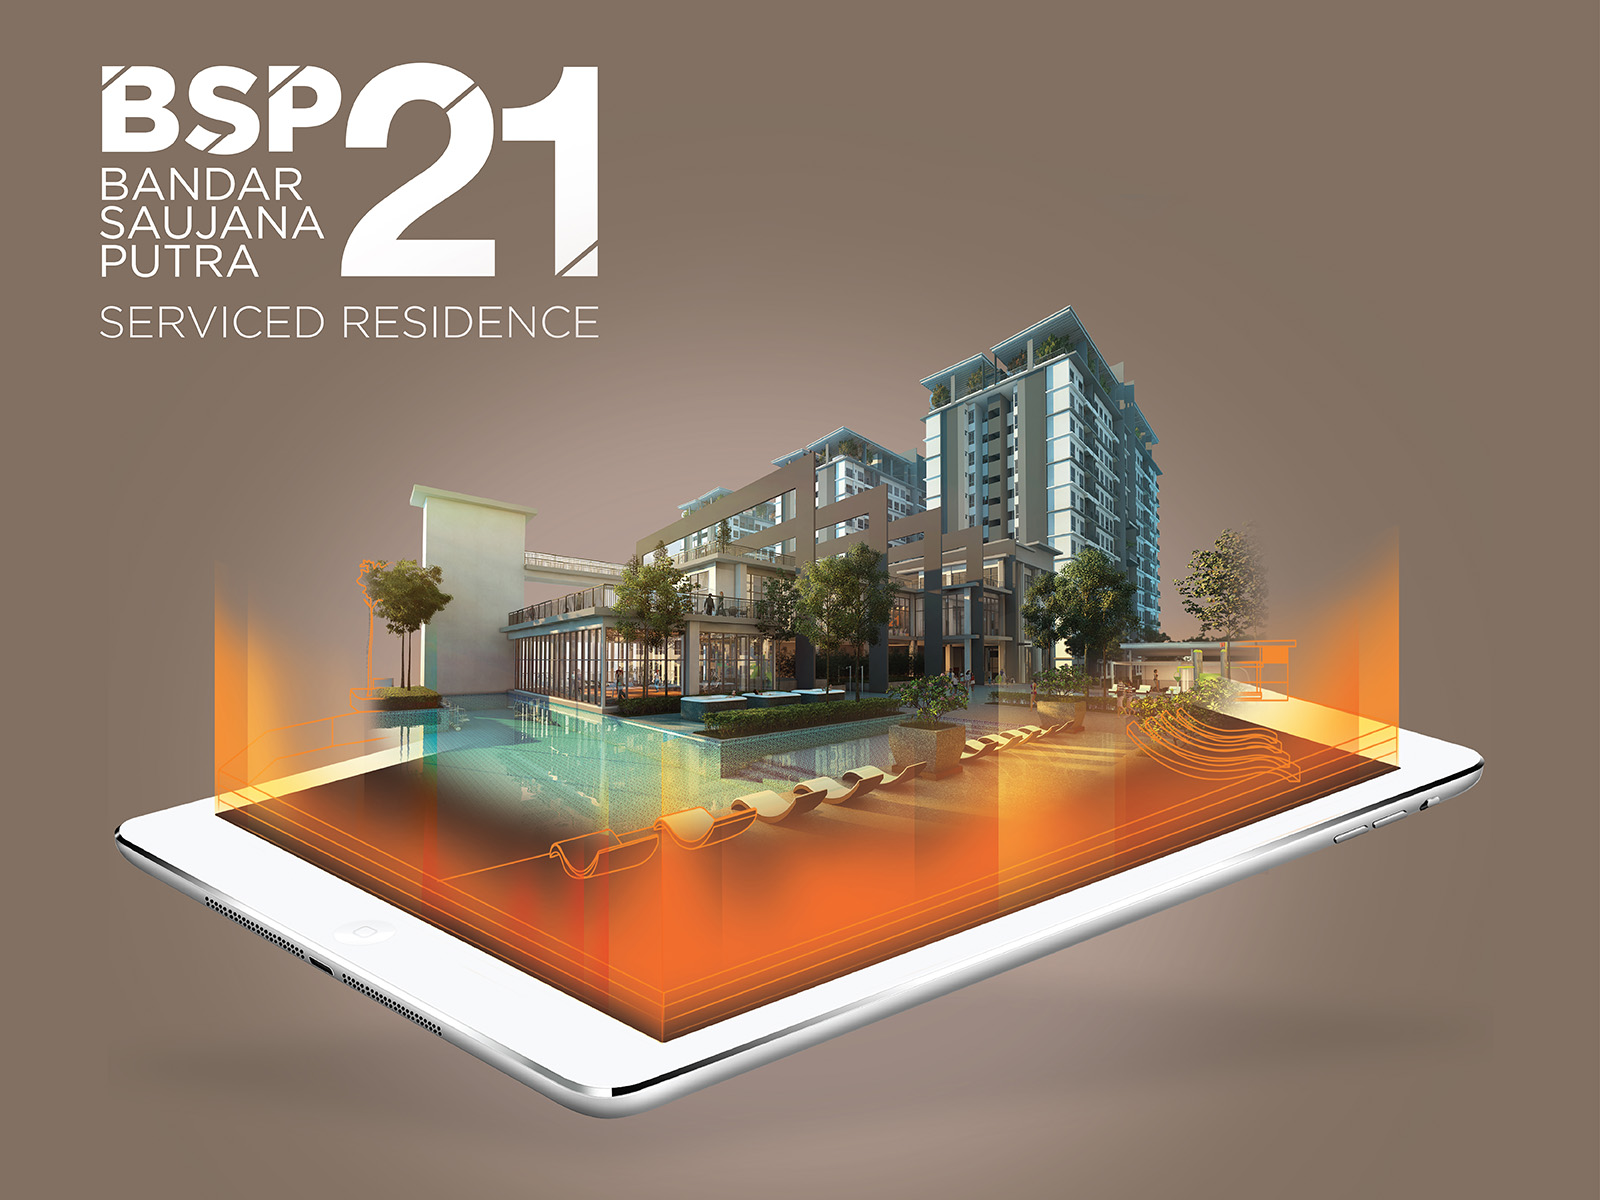 LBS Bina Group BSP21 facade emerging from a tablet device as cover image